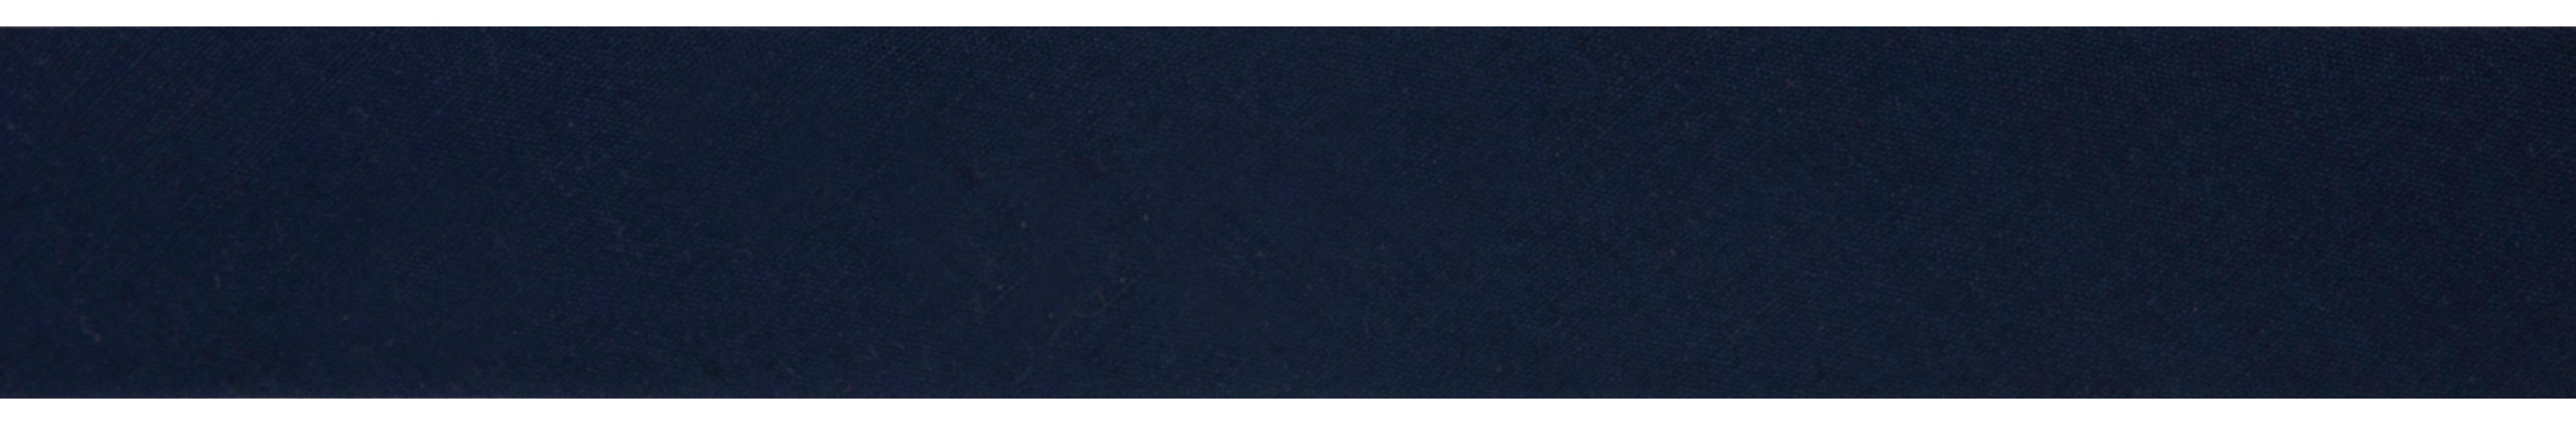 20m roll of Navy Bias Binding | 25mm width from Jaycotts Sewing Supplies